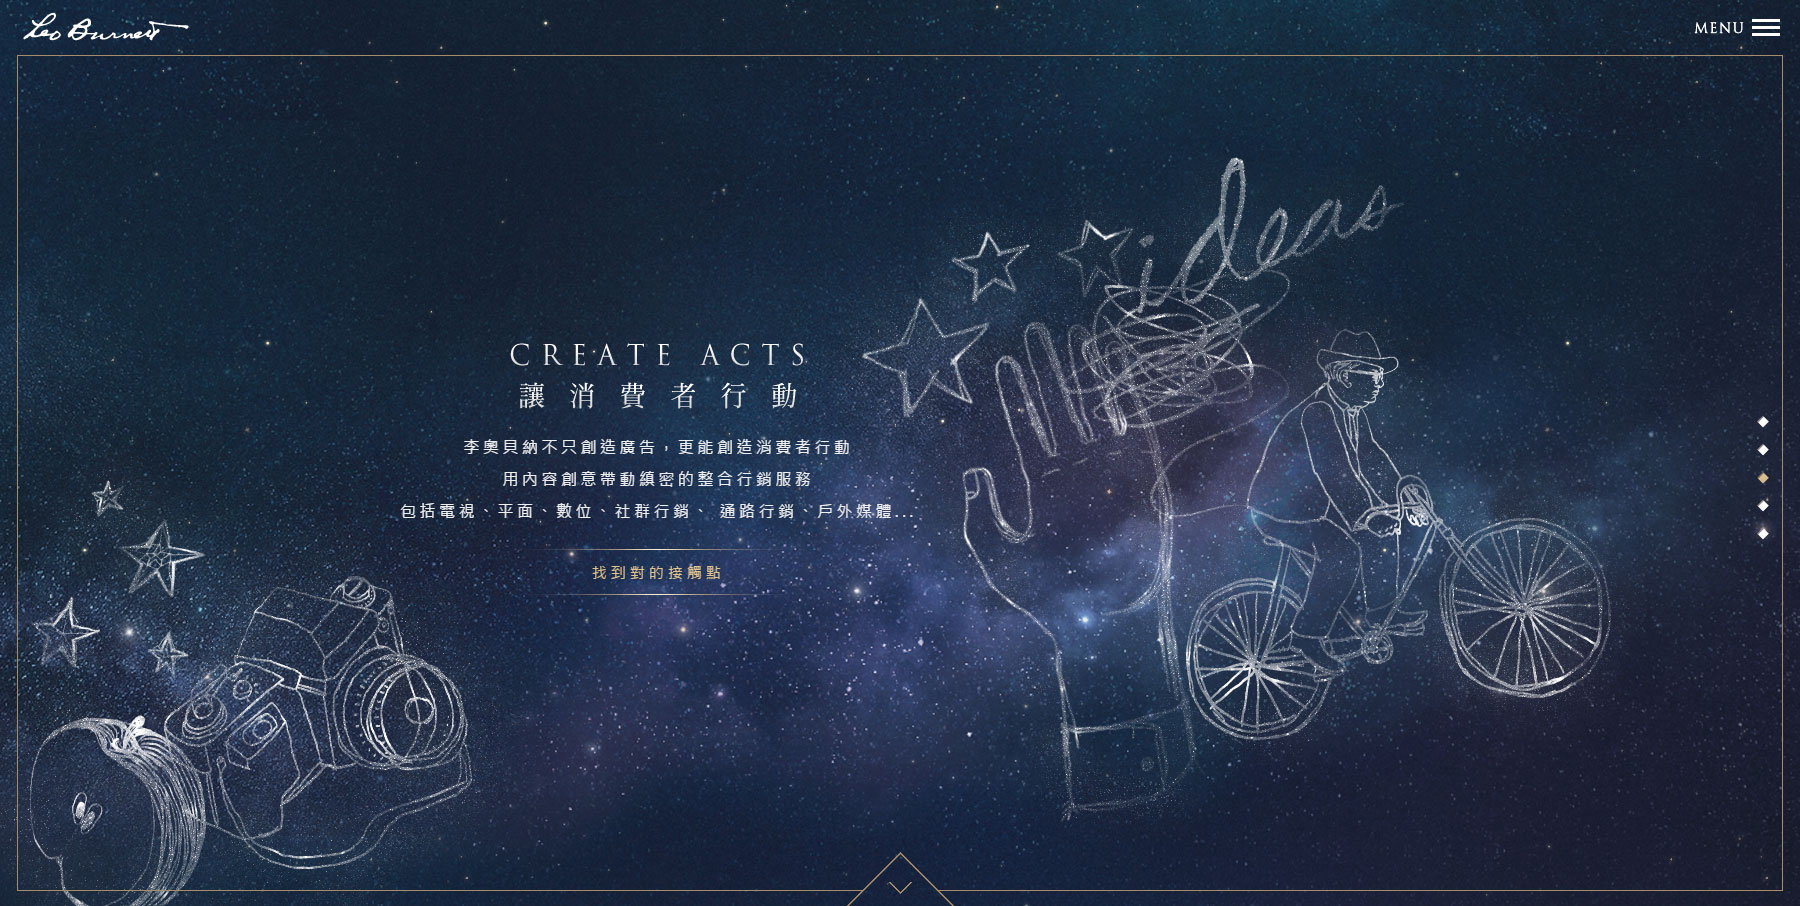 Leo Burnett Taiwan | Official Site - Website of the Day